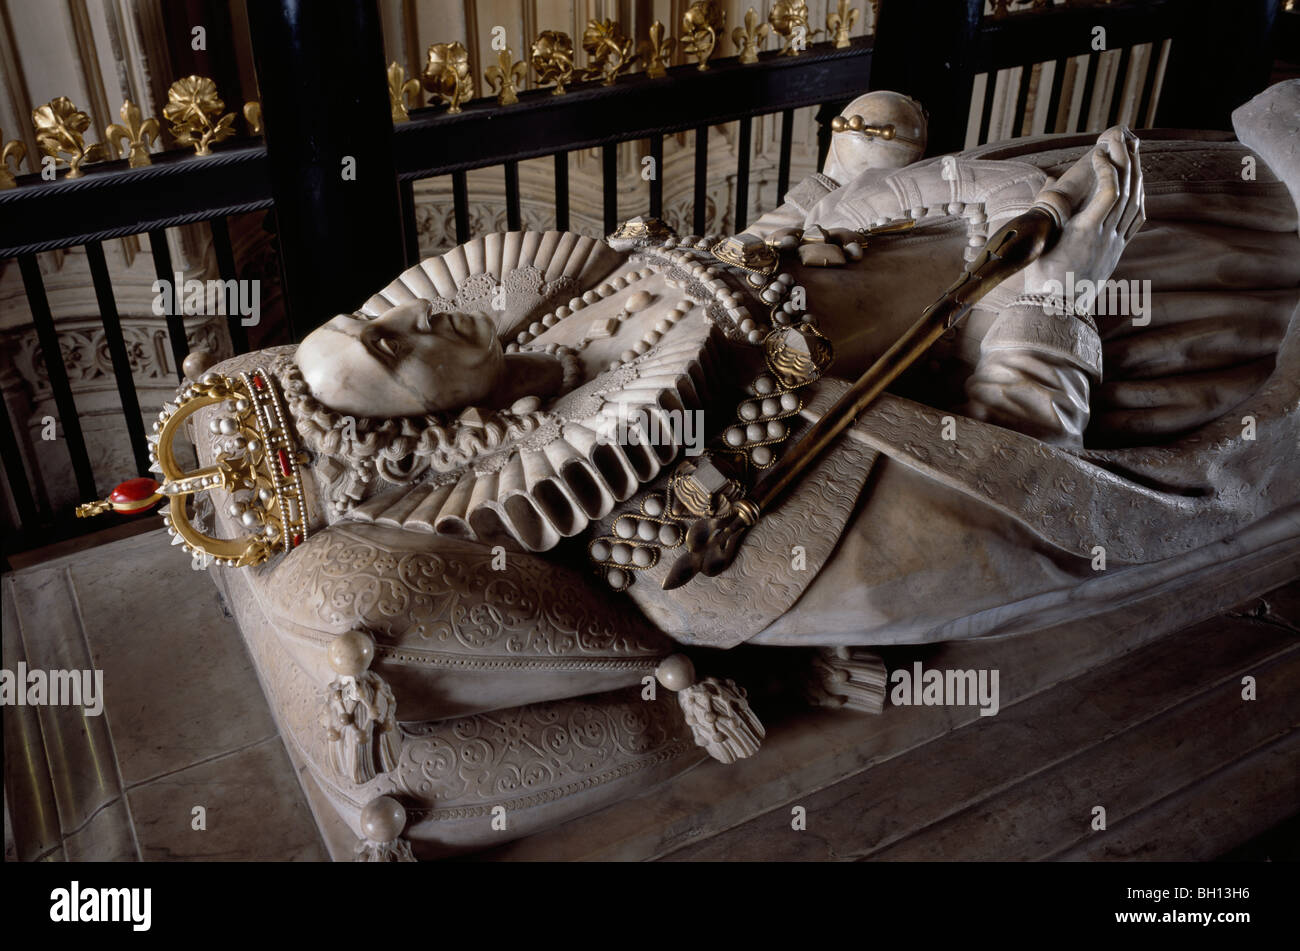 Queen Elizabeth I's tomb & monument by Maximilian Colt 1603, with crown ruff sceptre and orb Westminster Abbey London England Stock Photo